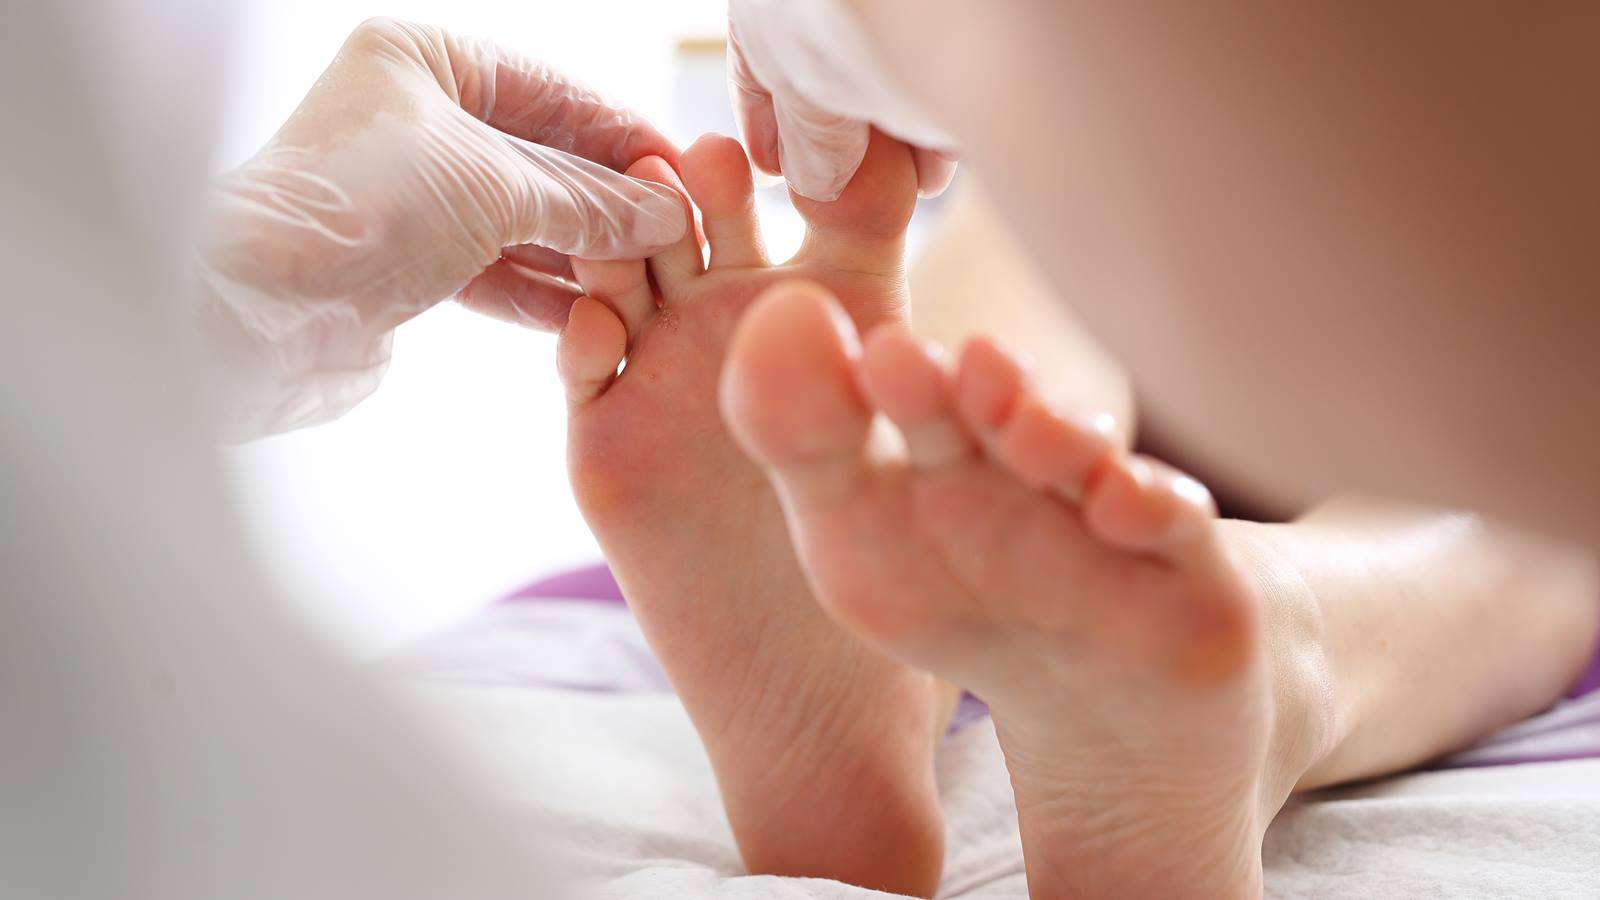 Caring for an Infected or Ingrown Toenail